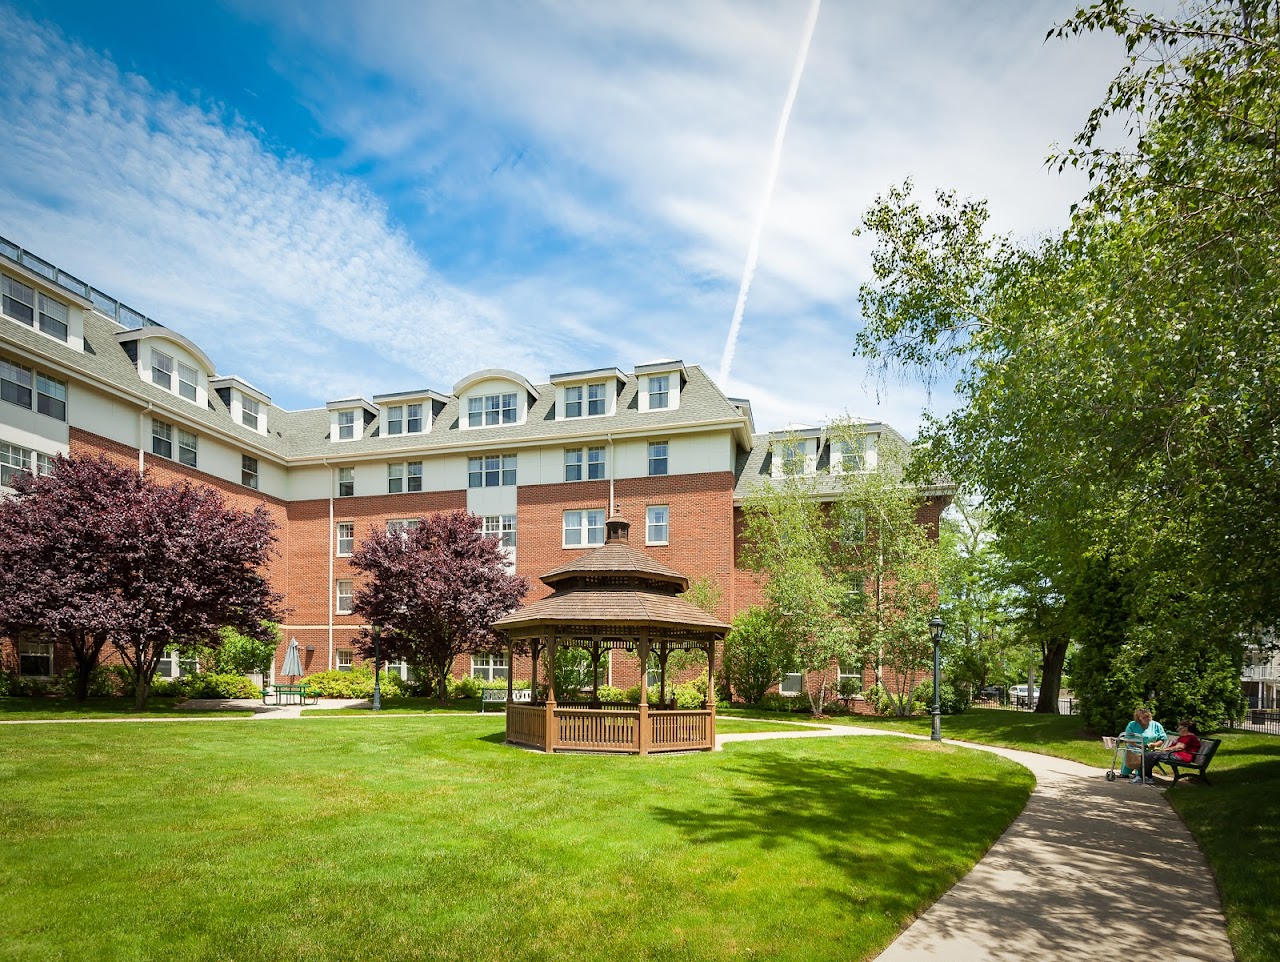 Photo of COREY ASSISTED LIVING LLC. Affordable housing located at 180 COREY RD BRIGHTON, MA 02135